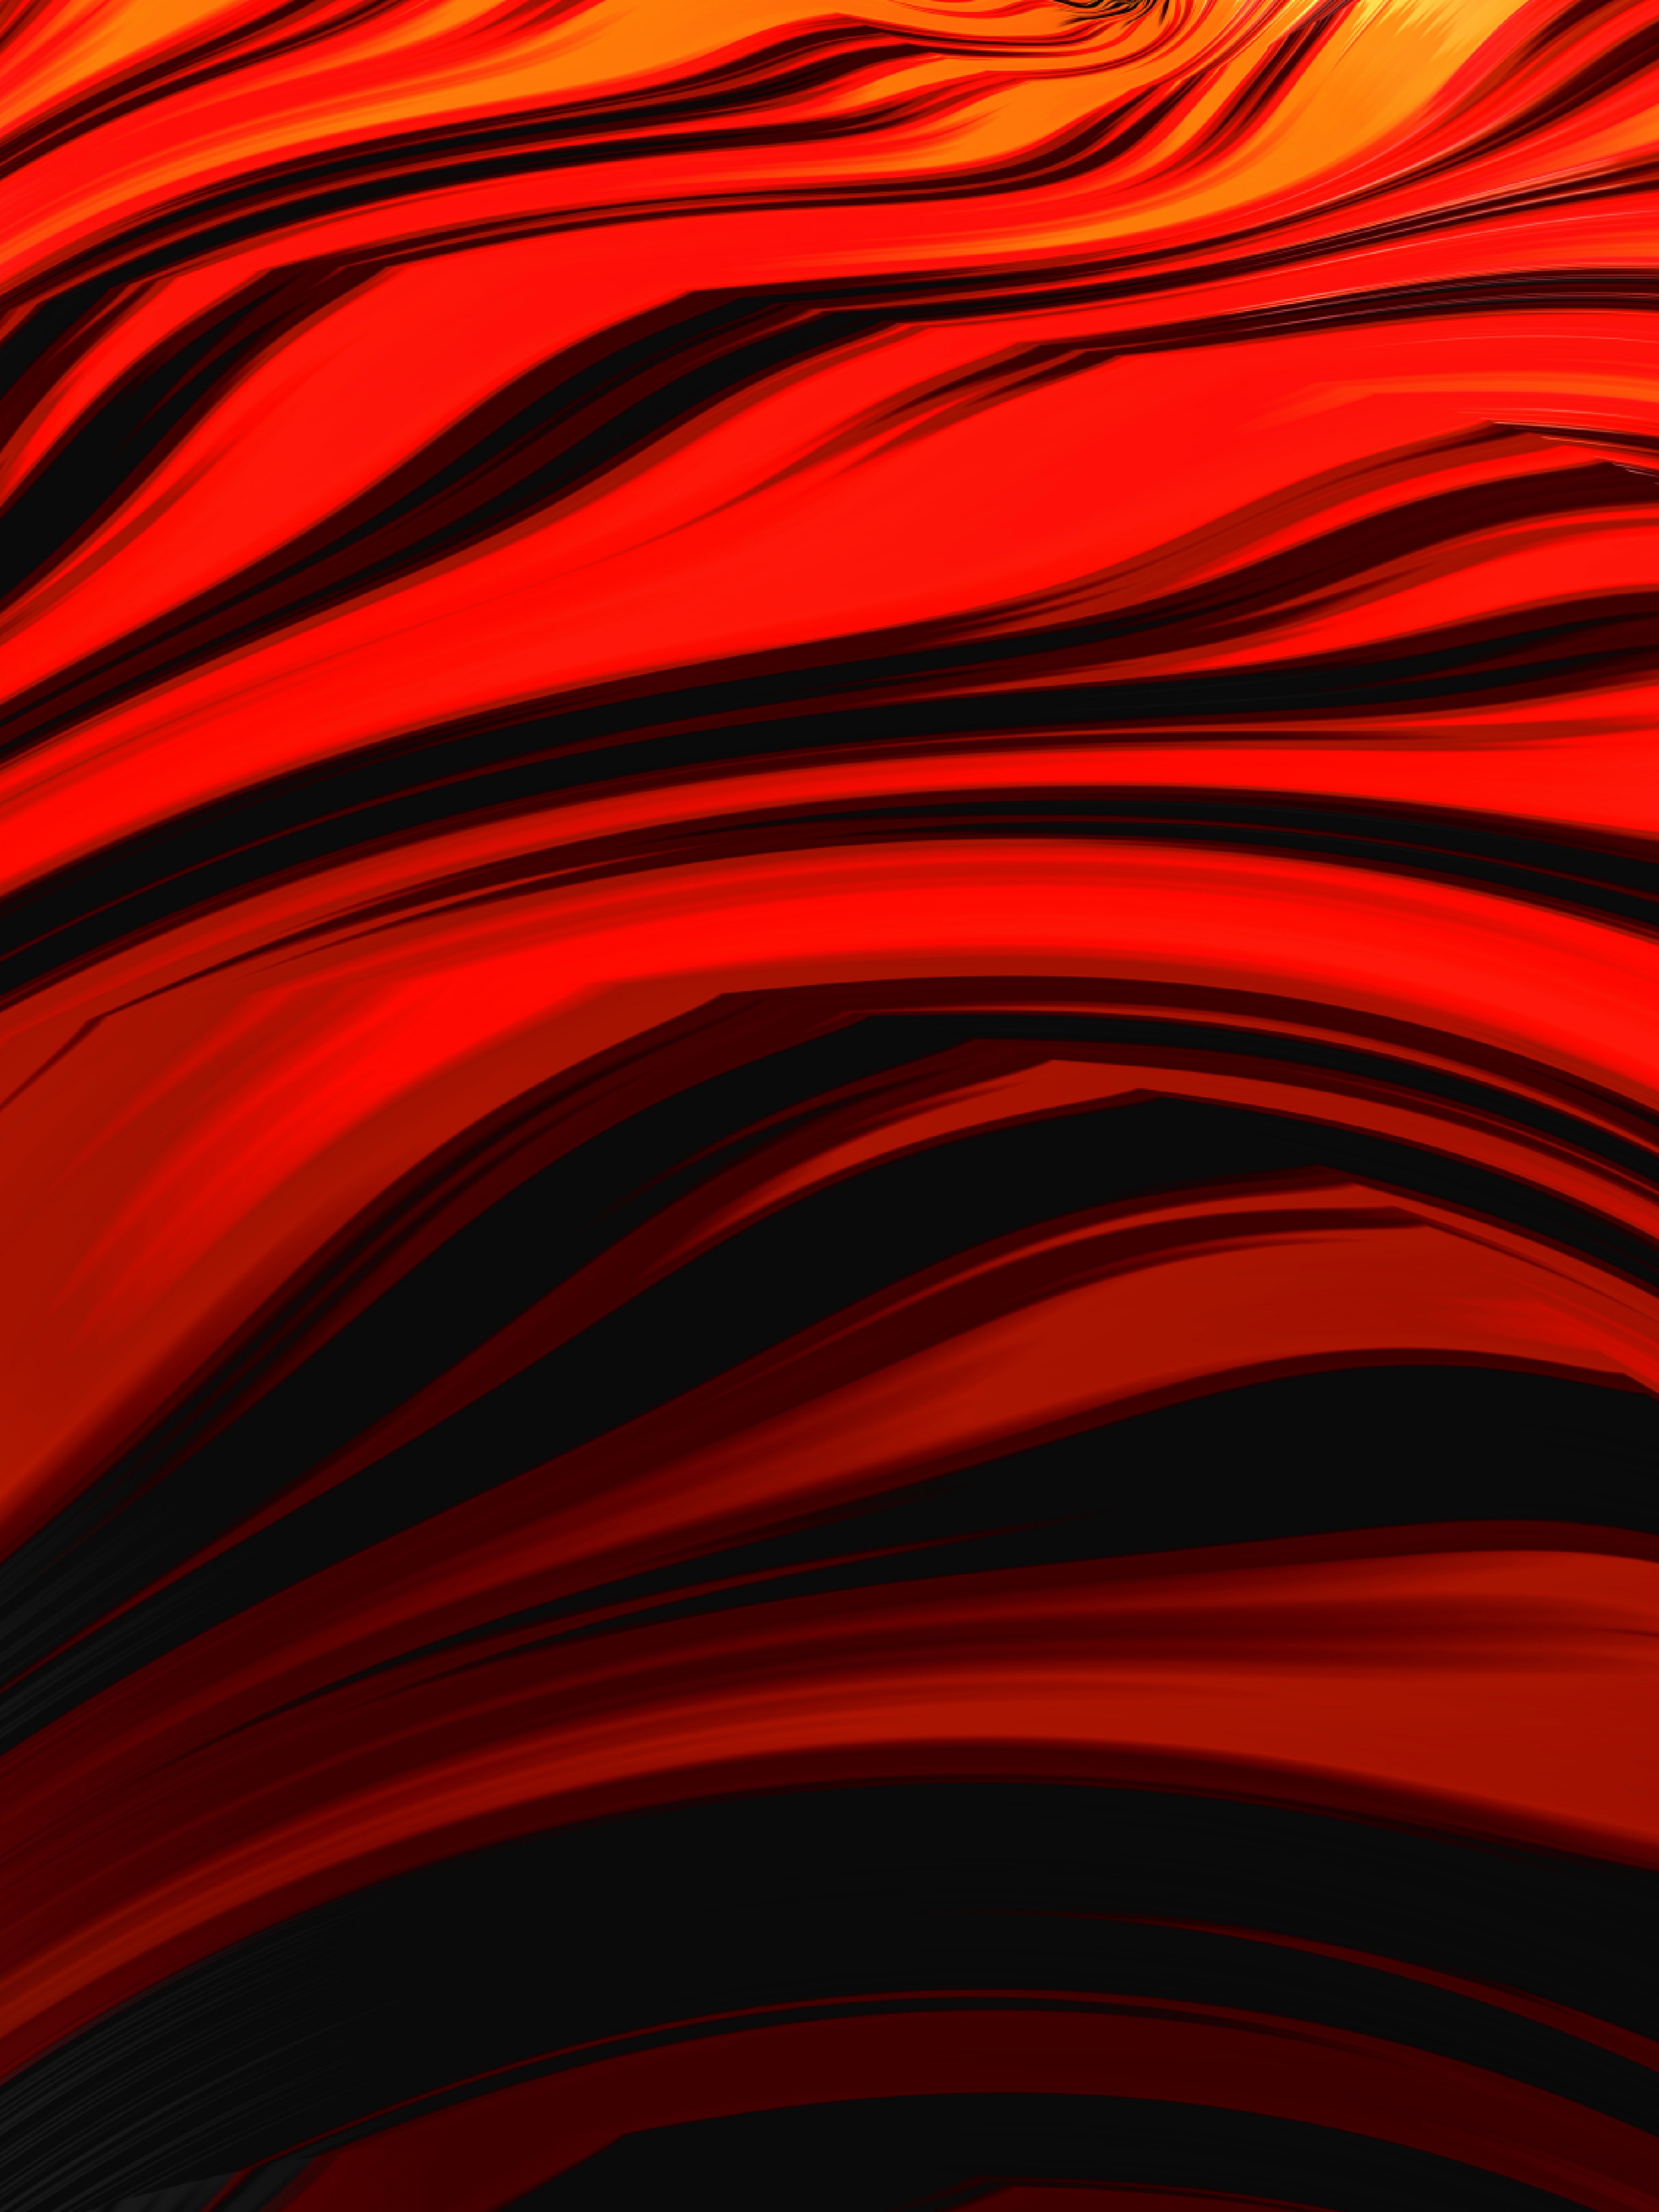 red, texture, abstract, bright, wavy, shadows, saturated, invoice lock screen backgrounds